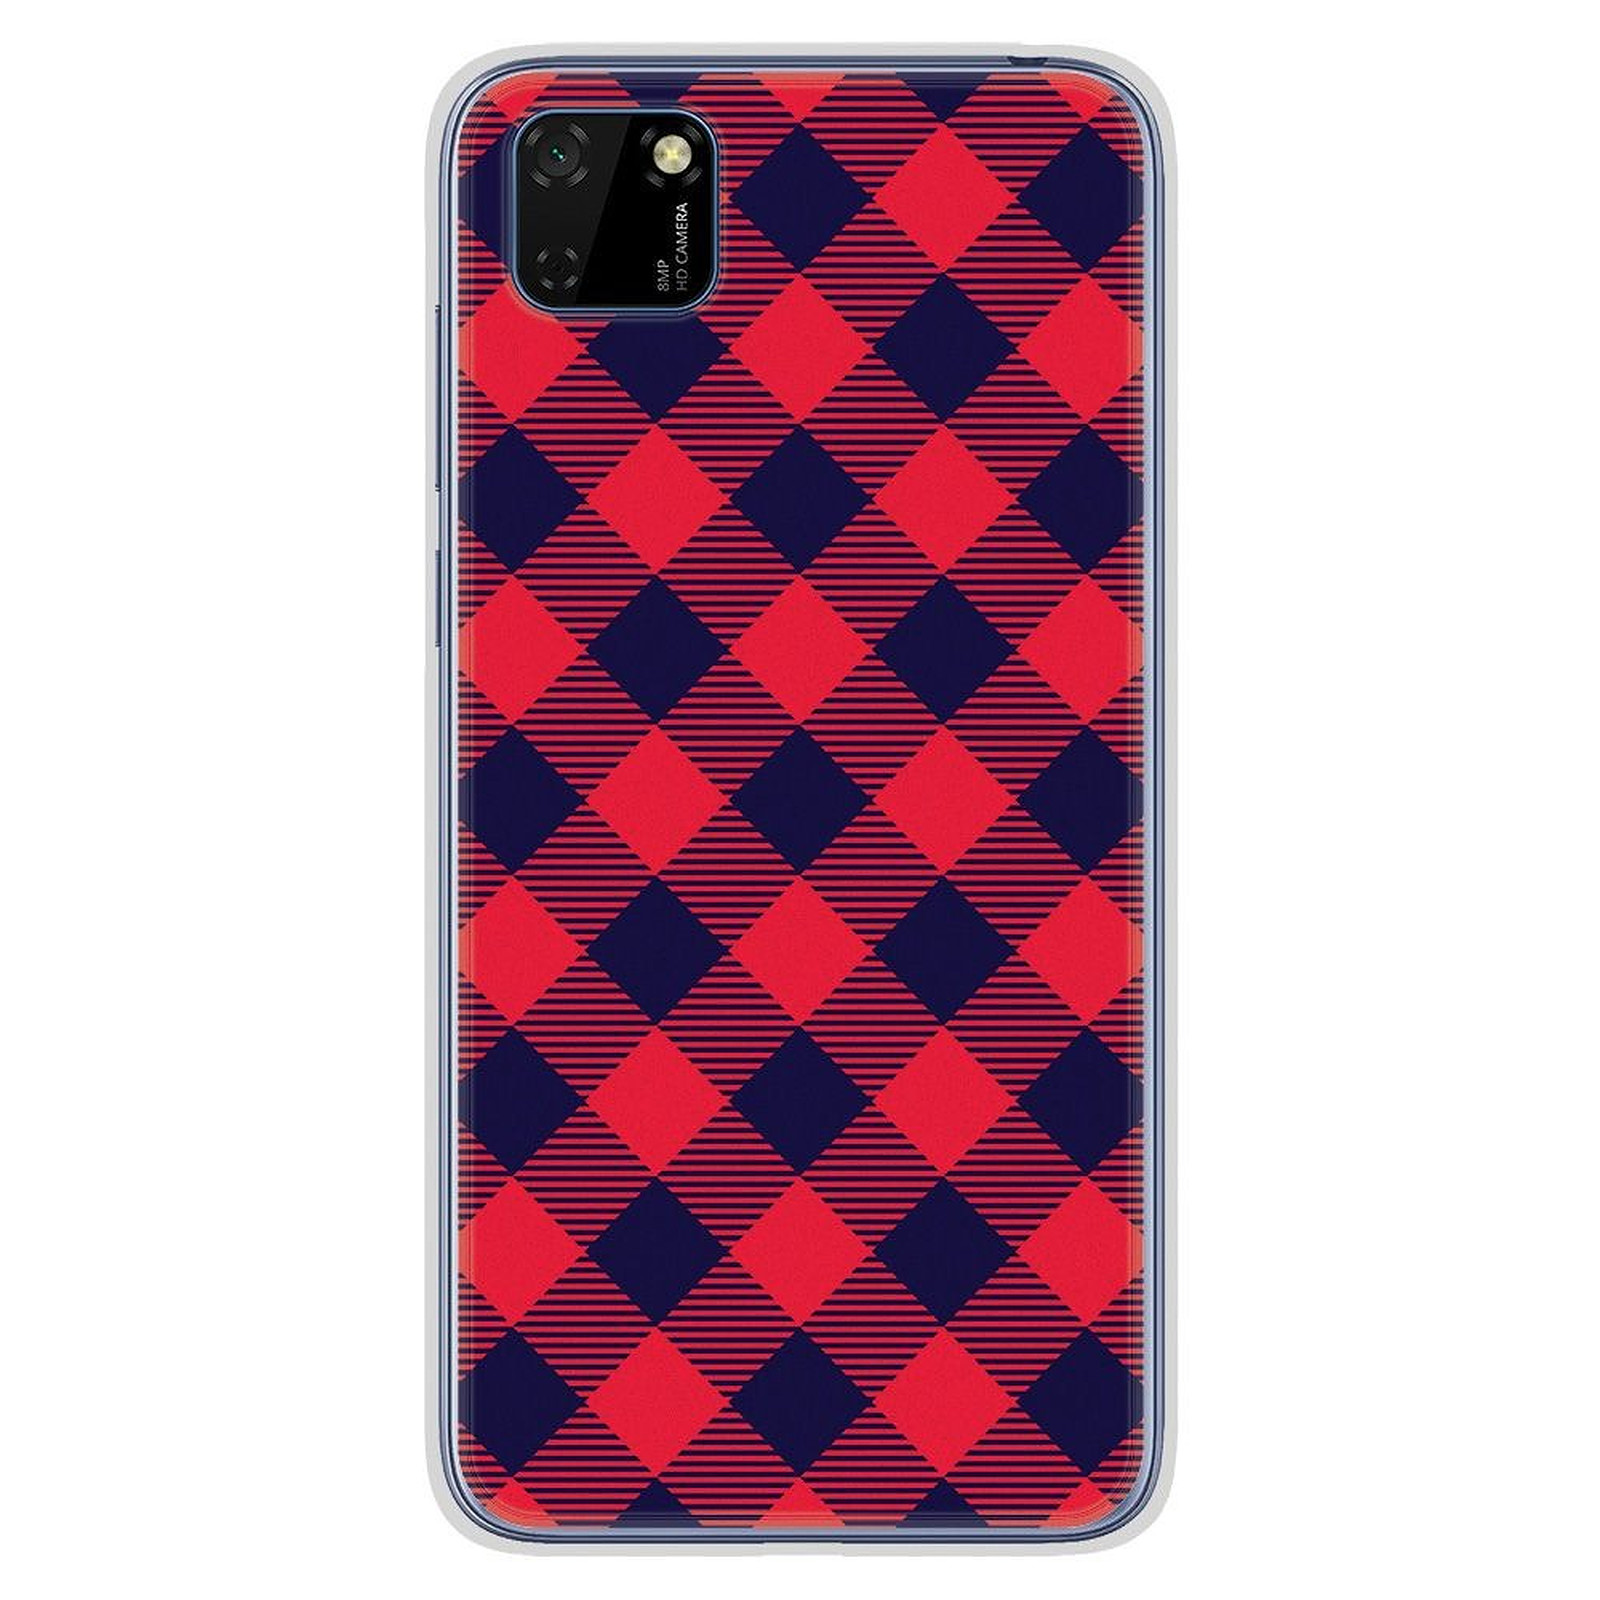 1001 Coques Coque silicone gel Huawei Y5P motif Tartan Rouge - Coque telephone 1001Coques